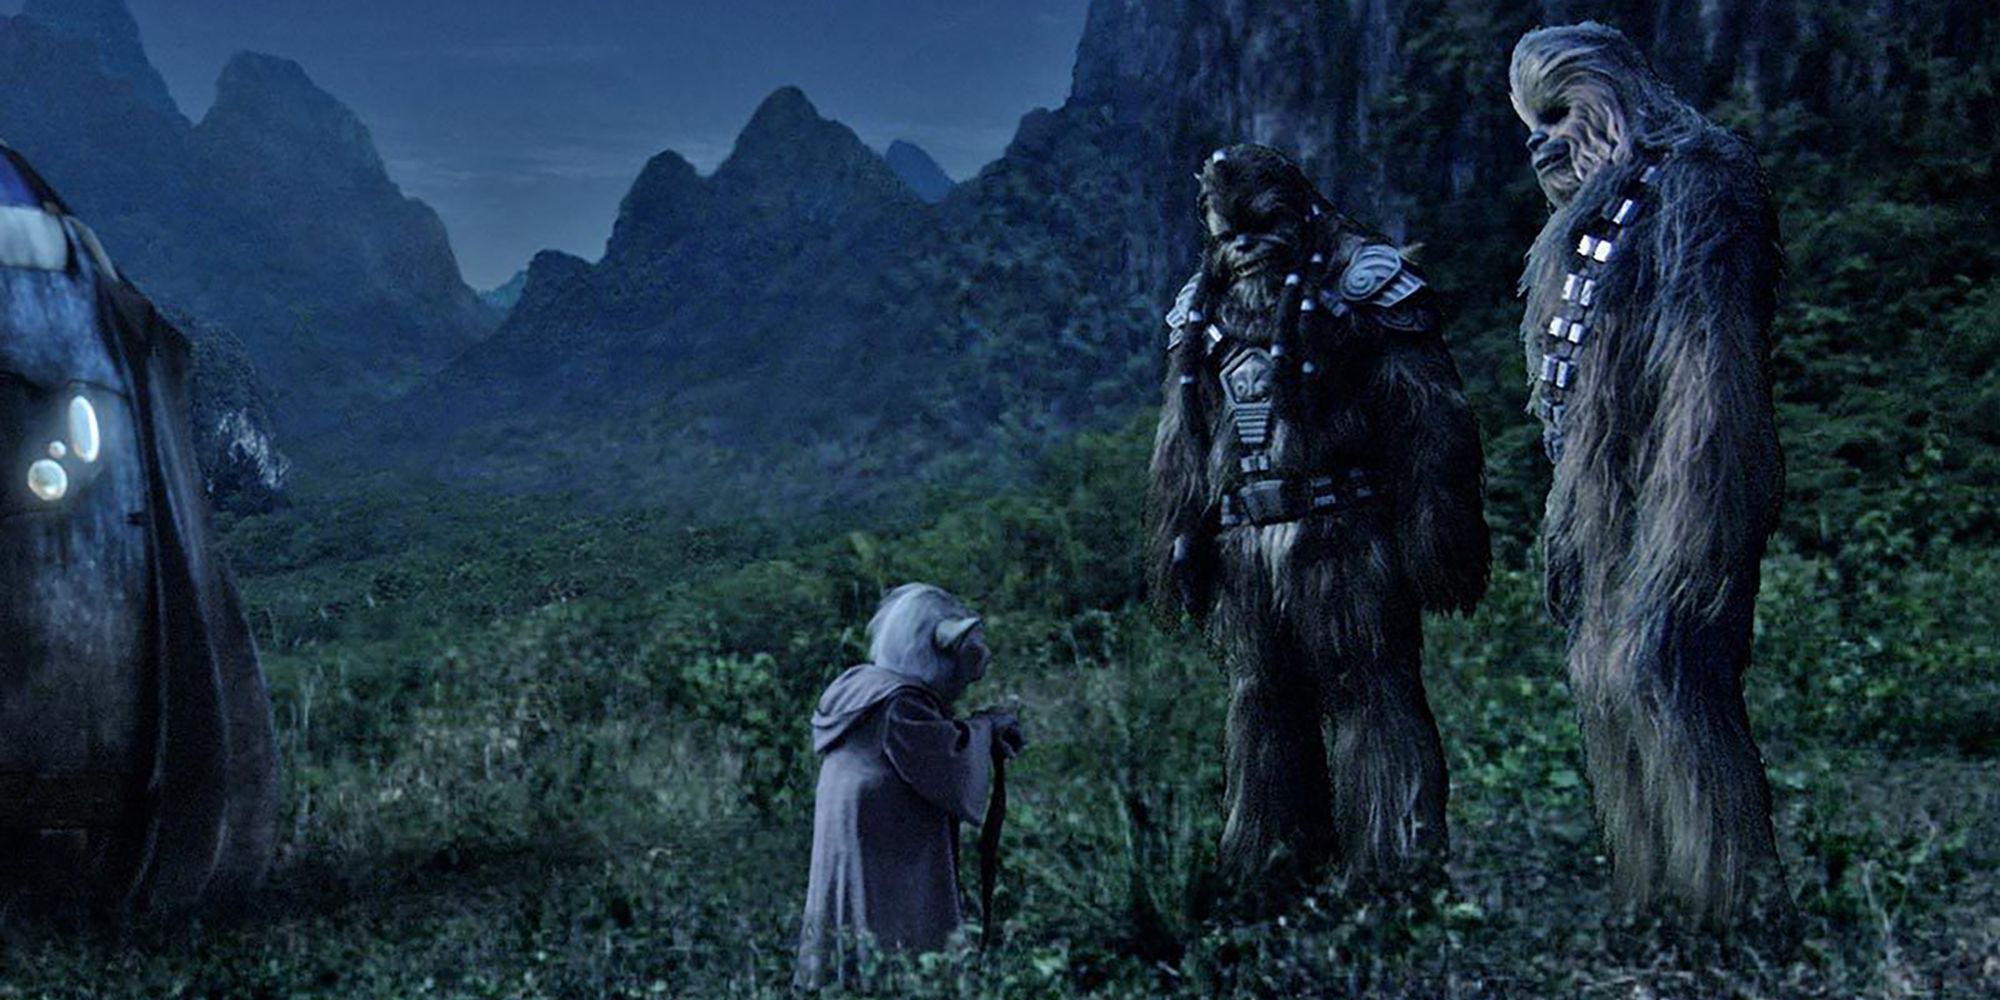 Wookies With Yoda In Star Wars